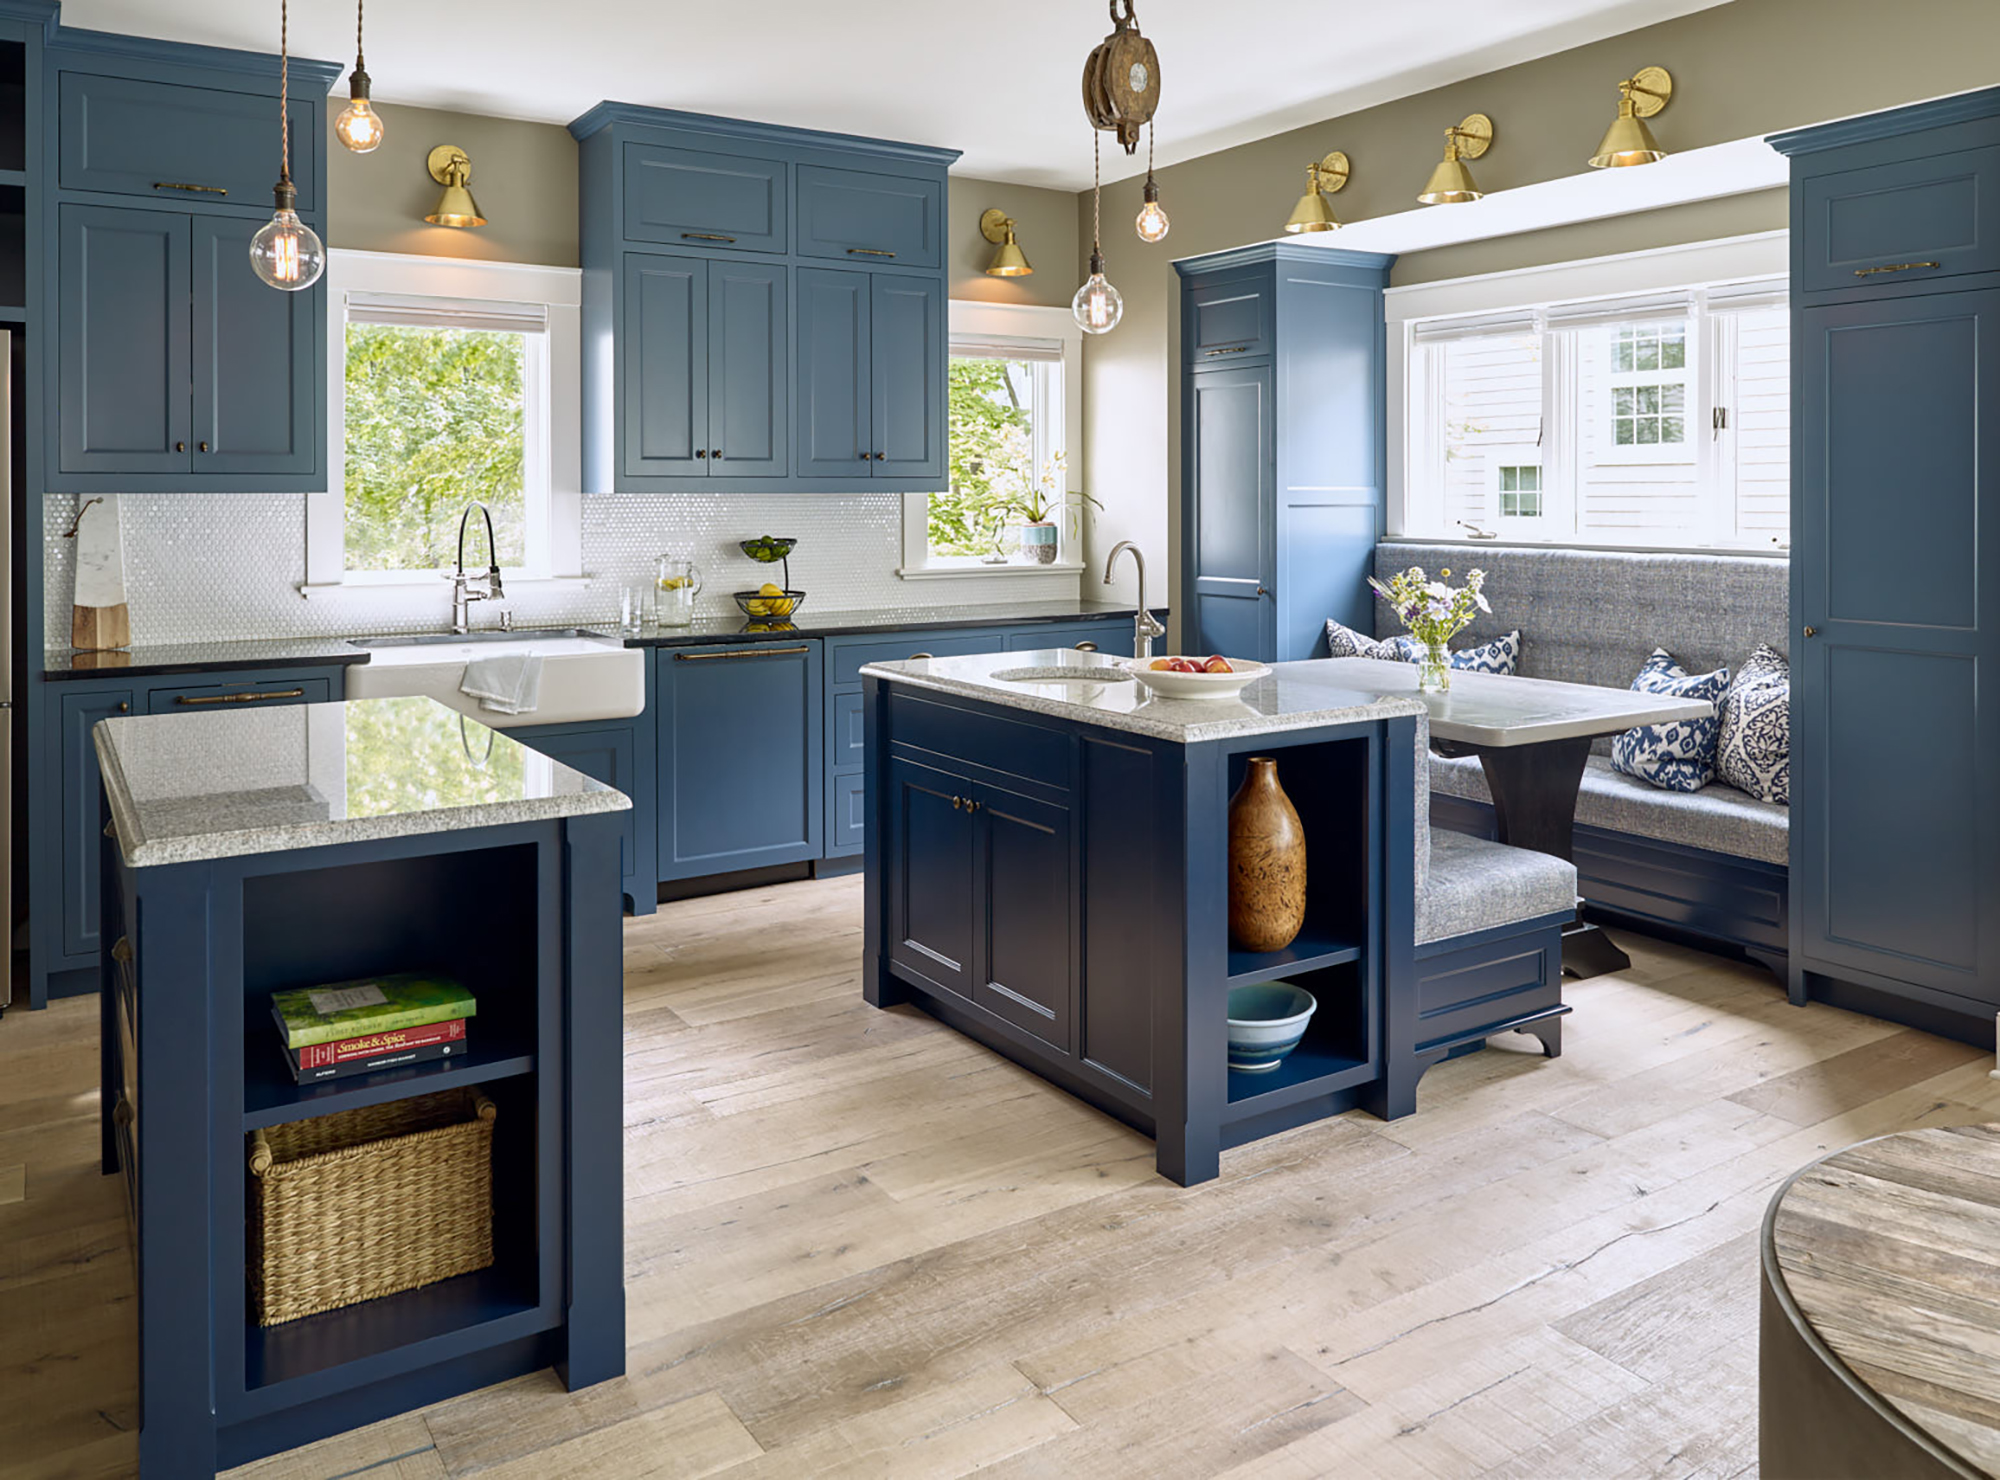 Large blue kitchen with built-in bench sitting areas and unique vintage lighting.